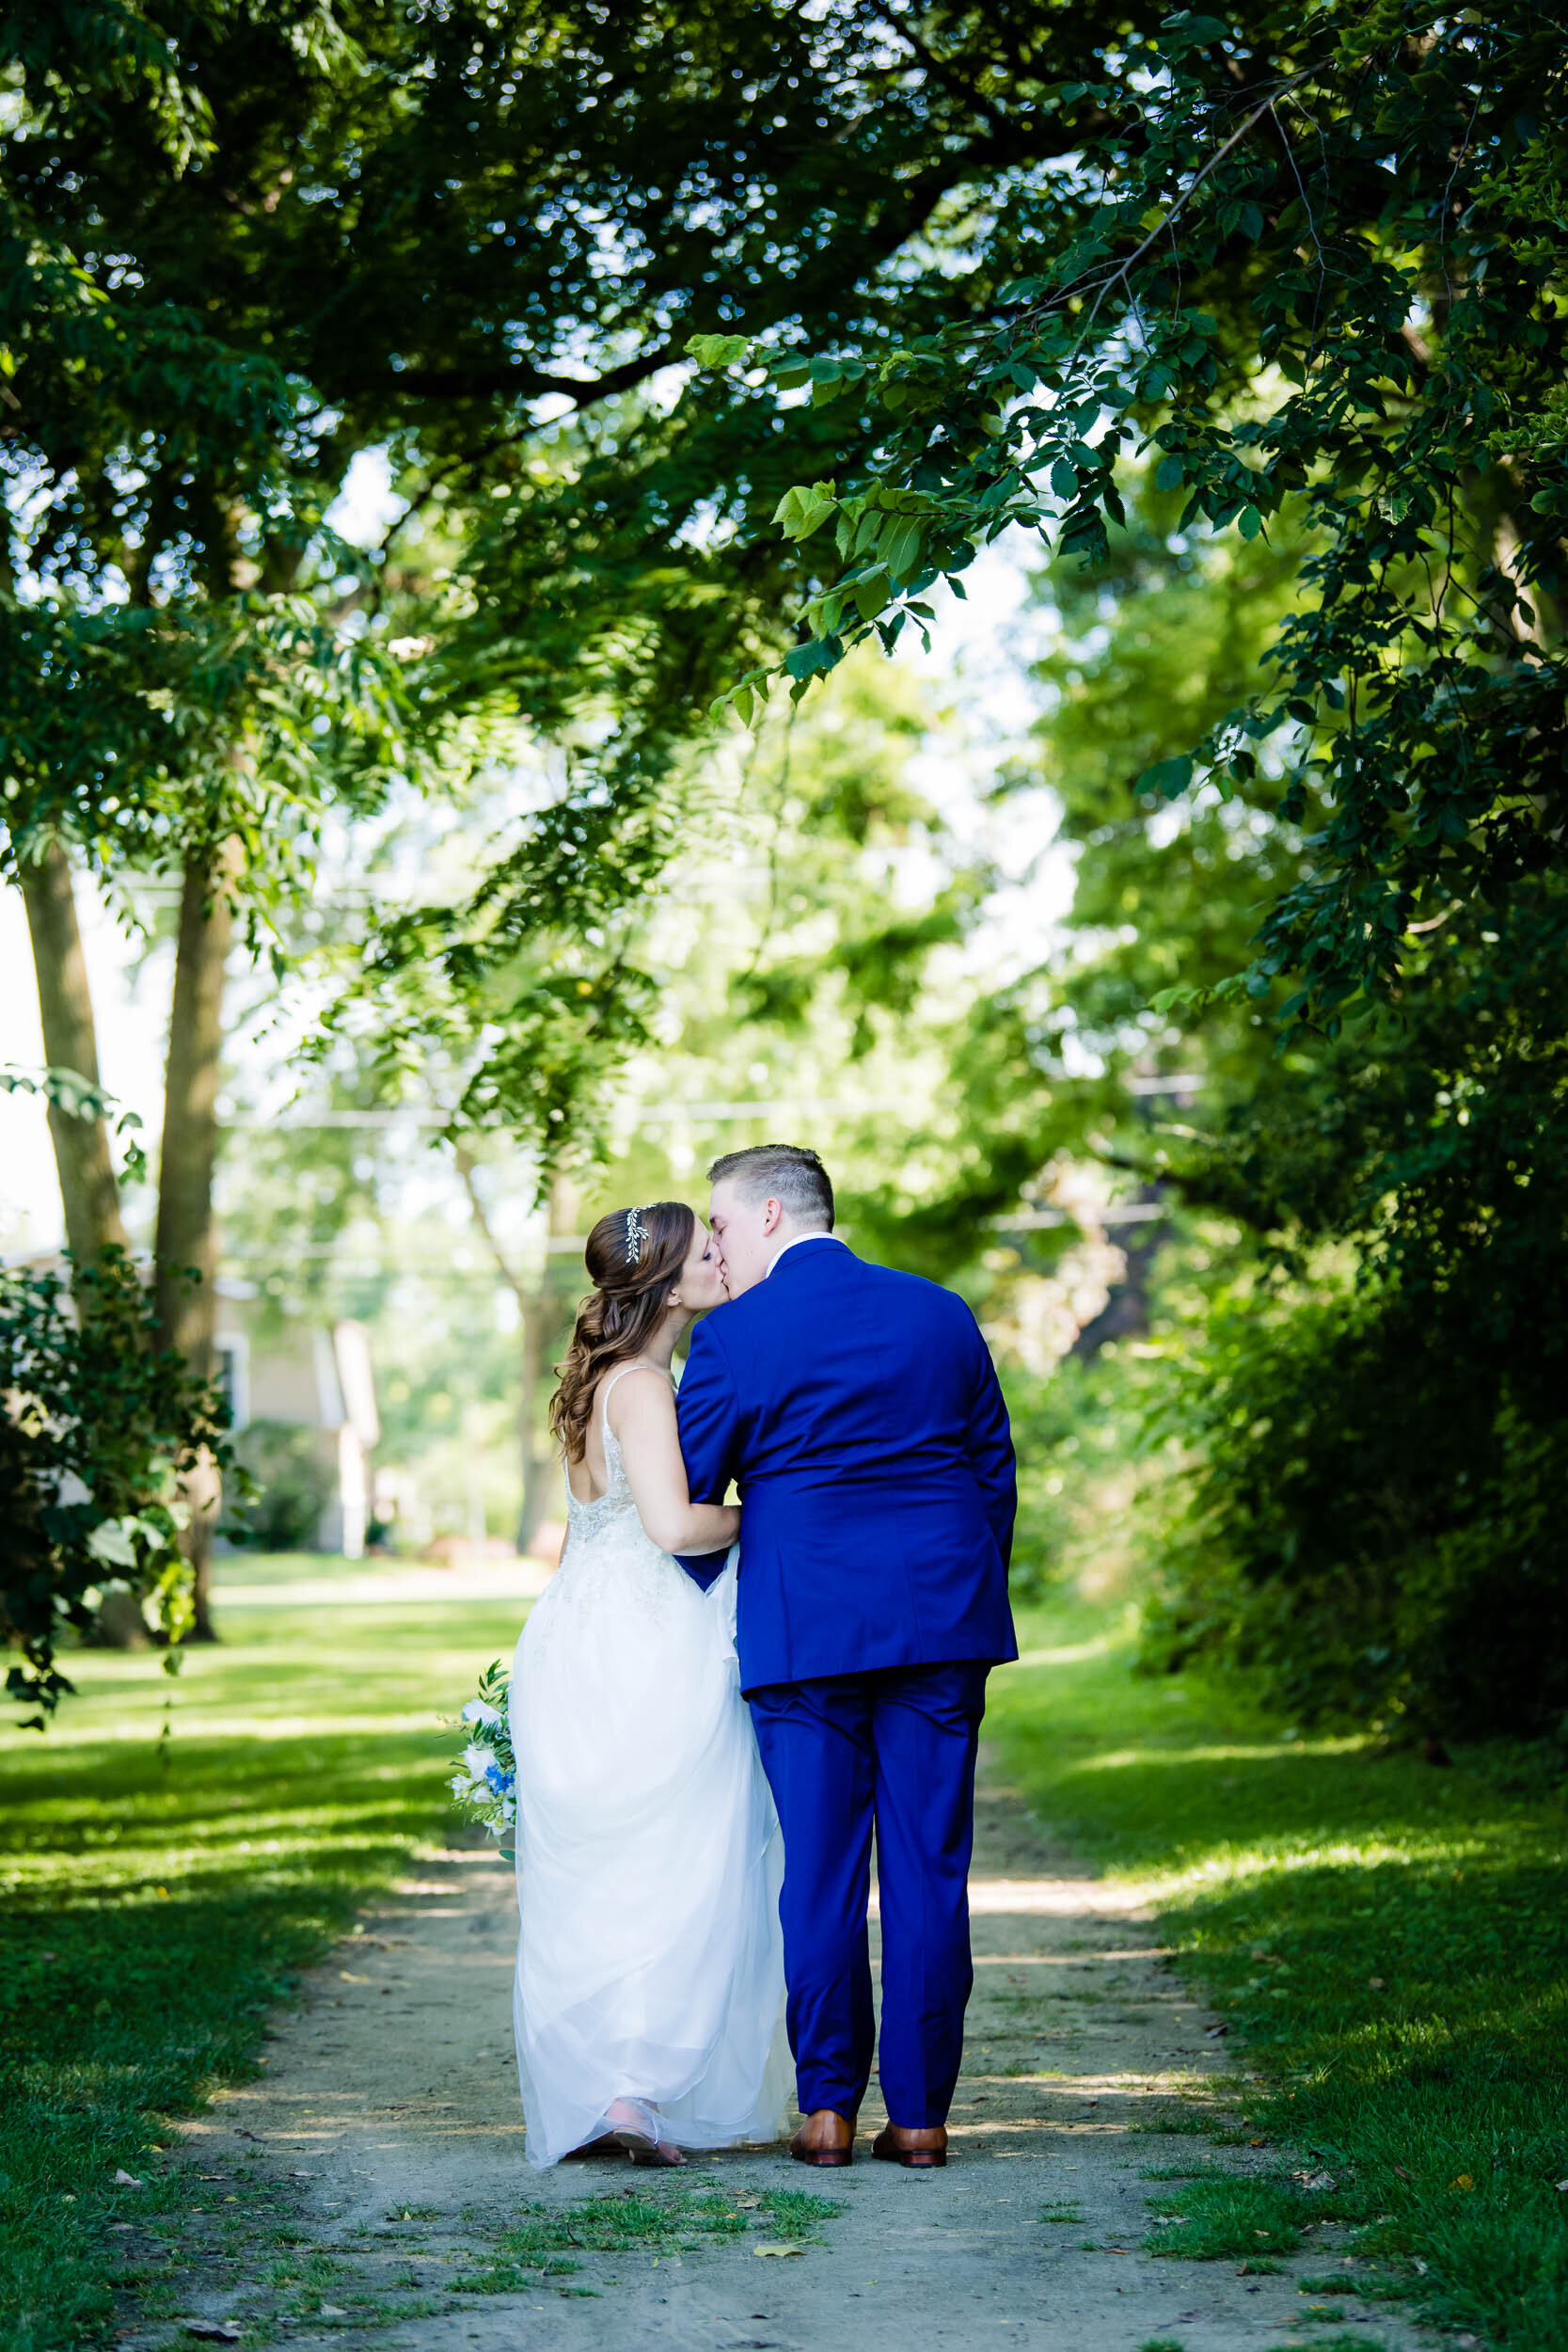 Bride and groom kiss for a wedding day portrait:  Chicago backyard wedding photographed by J. Brown Photography.